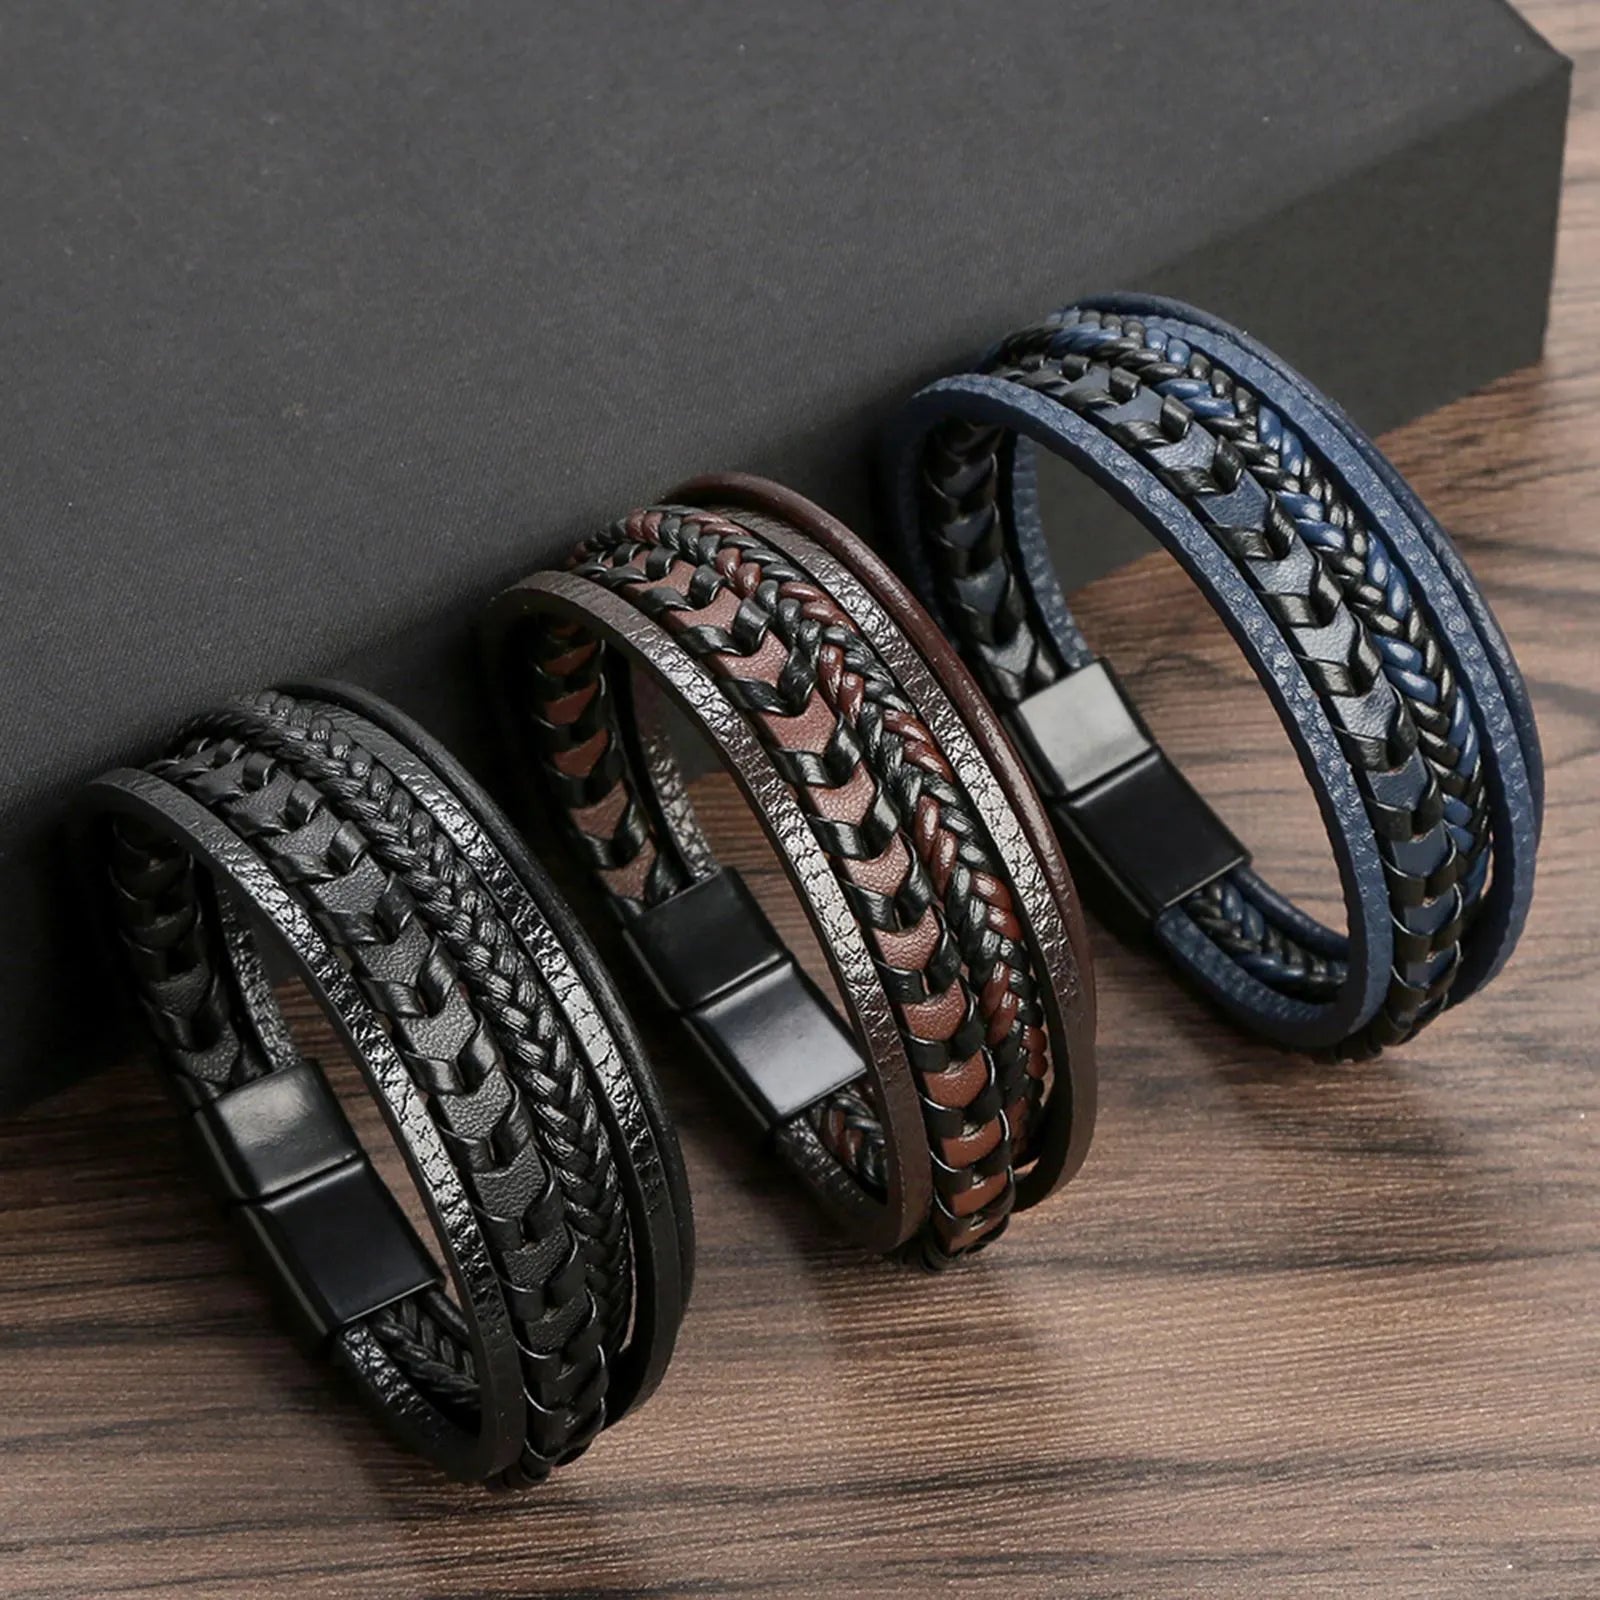 Leather Bracelets - Trend-Setting Gifts for Style and Wellness - Free Shipping Available!